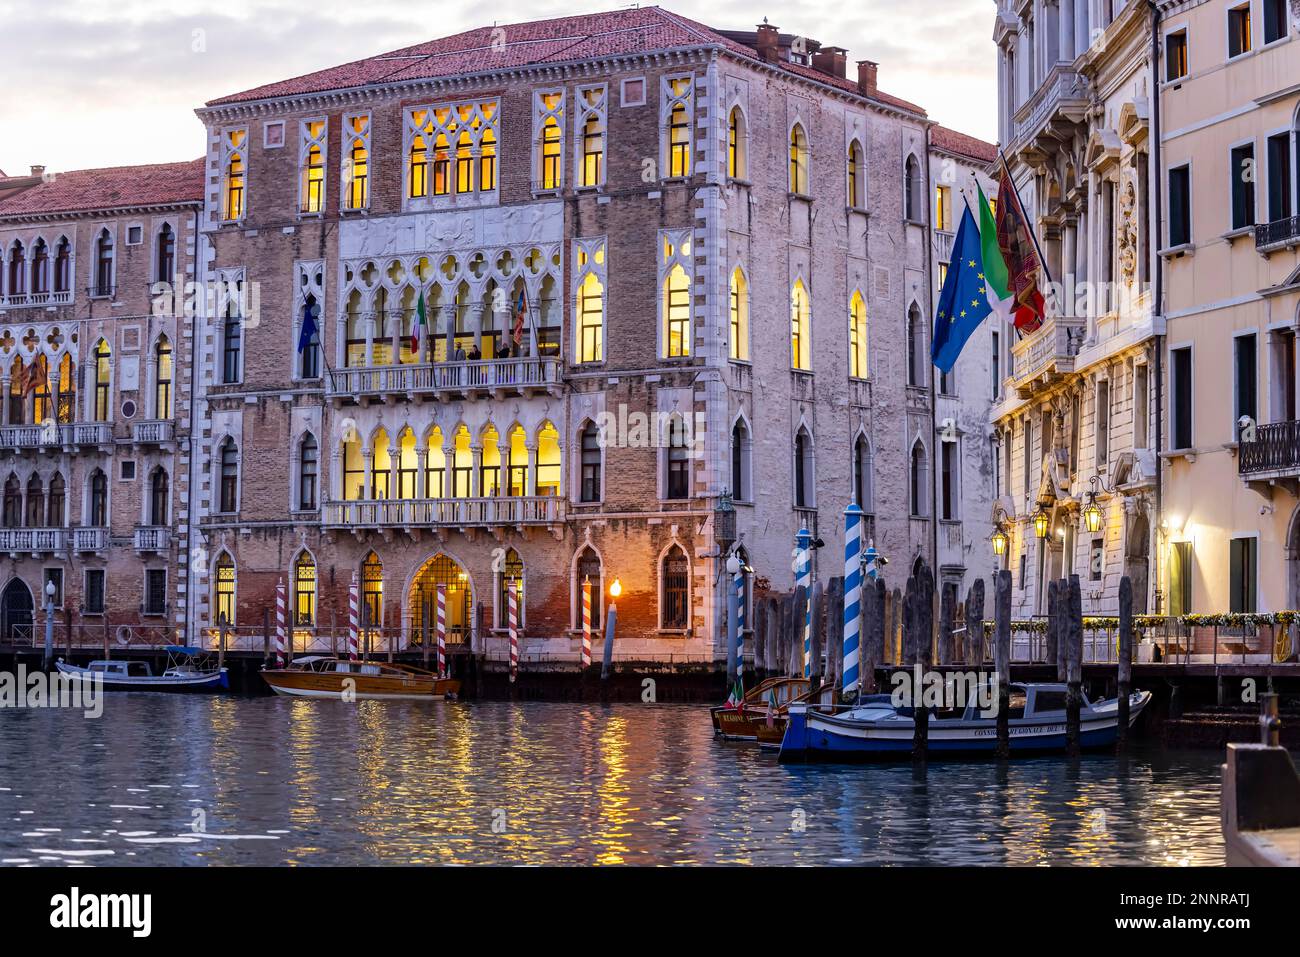 Evening atmosphere on the Grand Canal, Venice, Italy Stock Photo